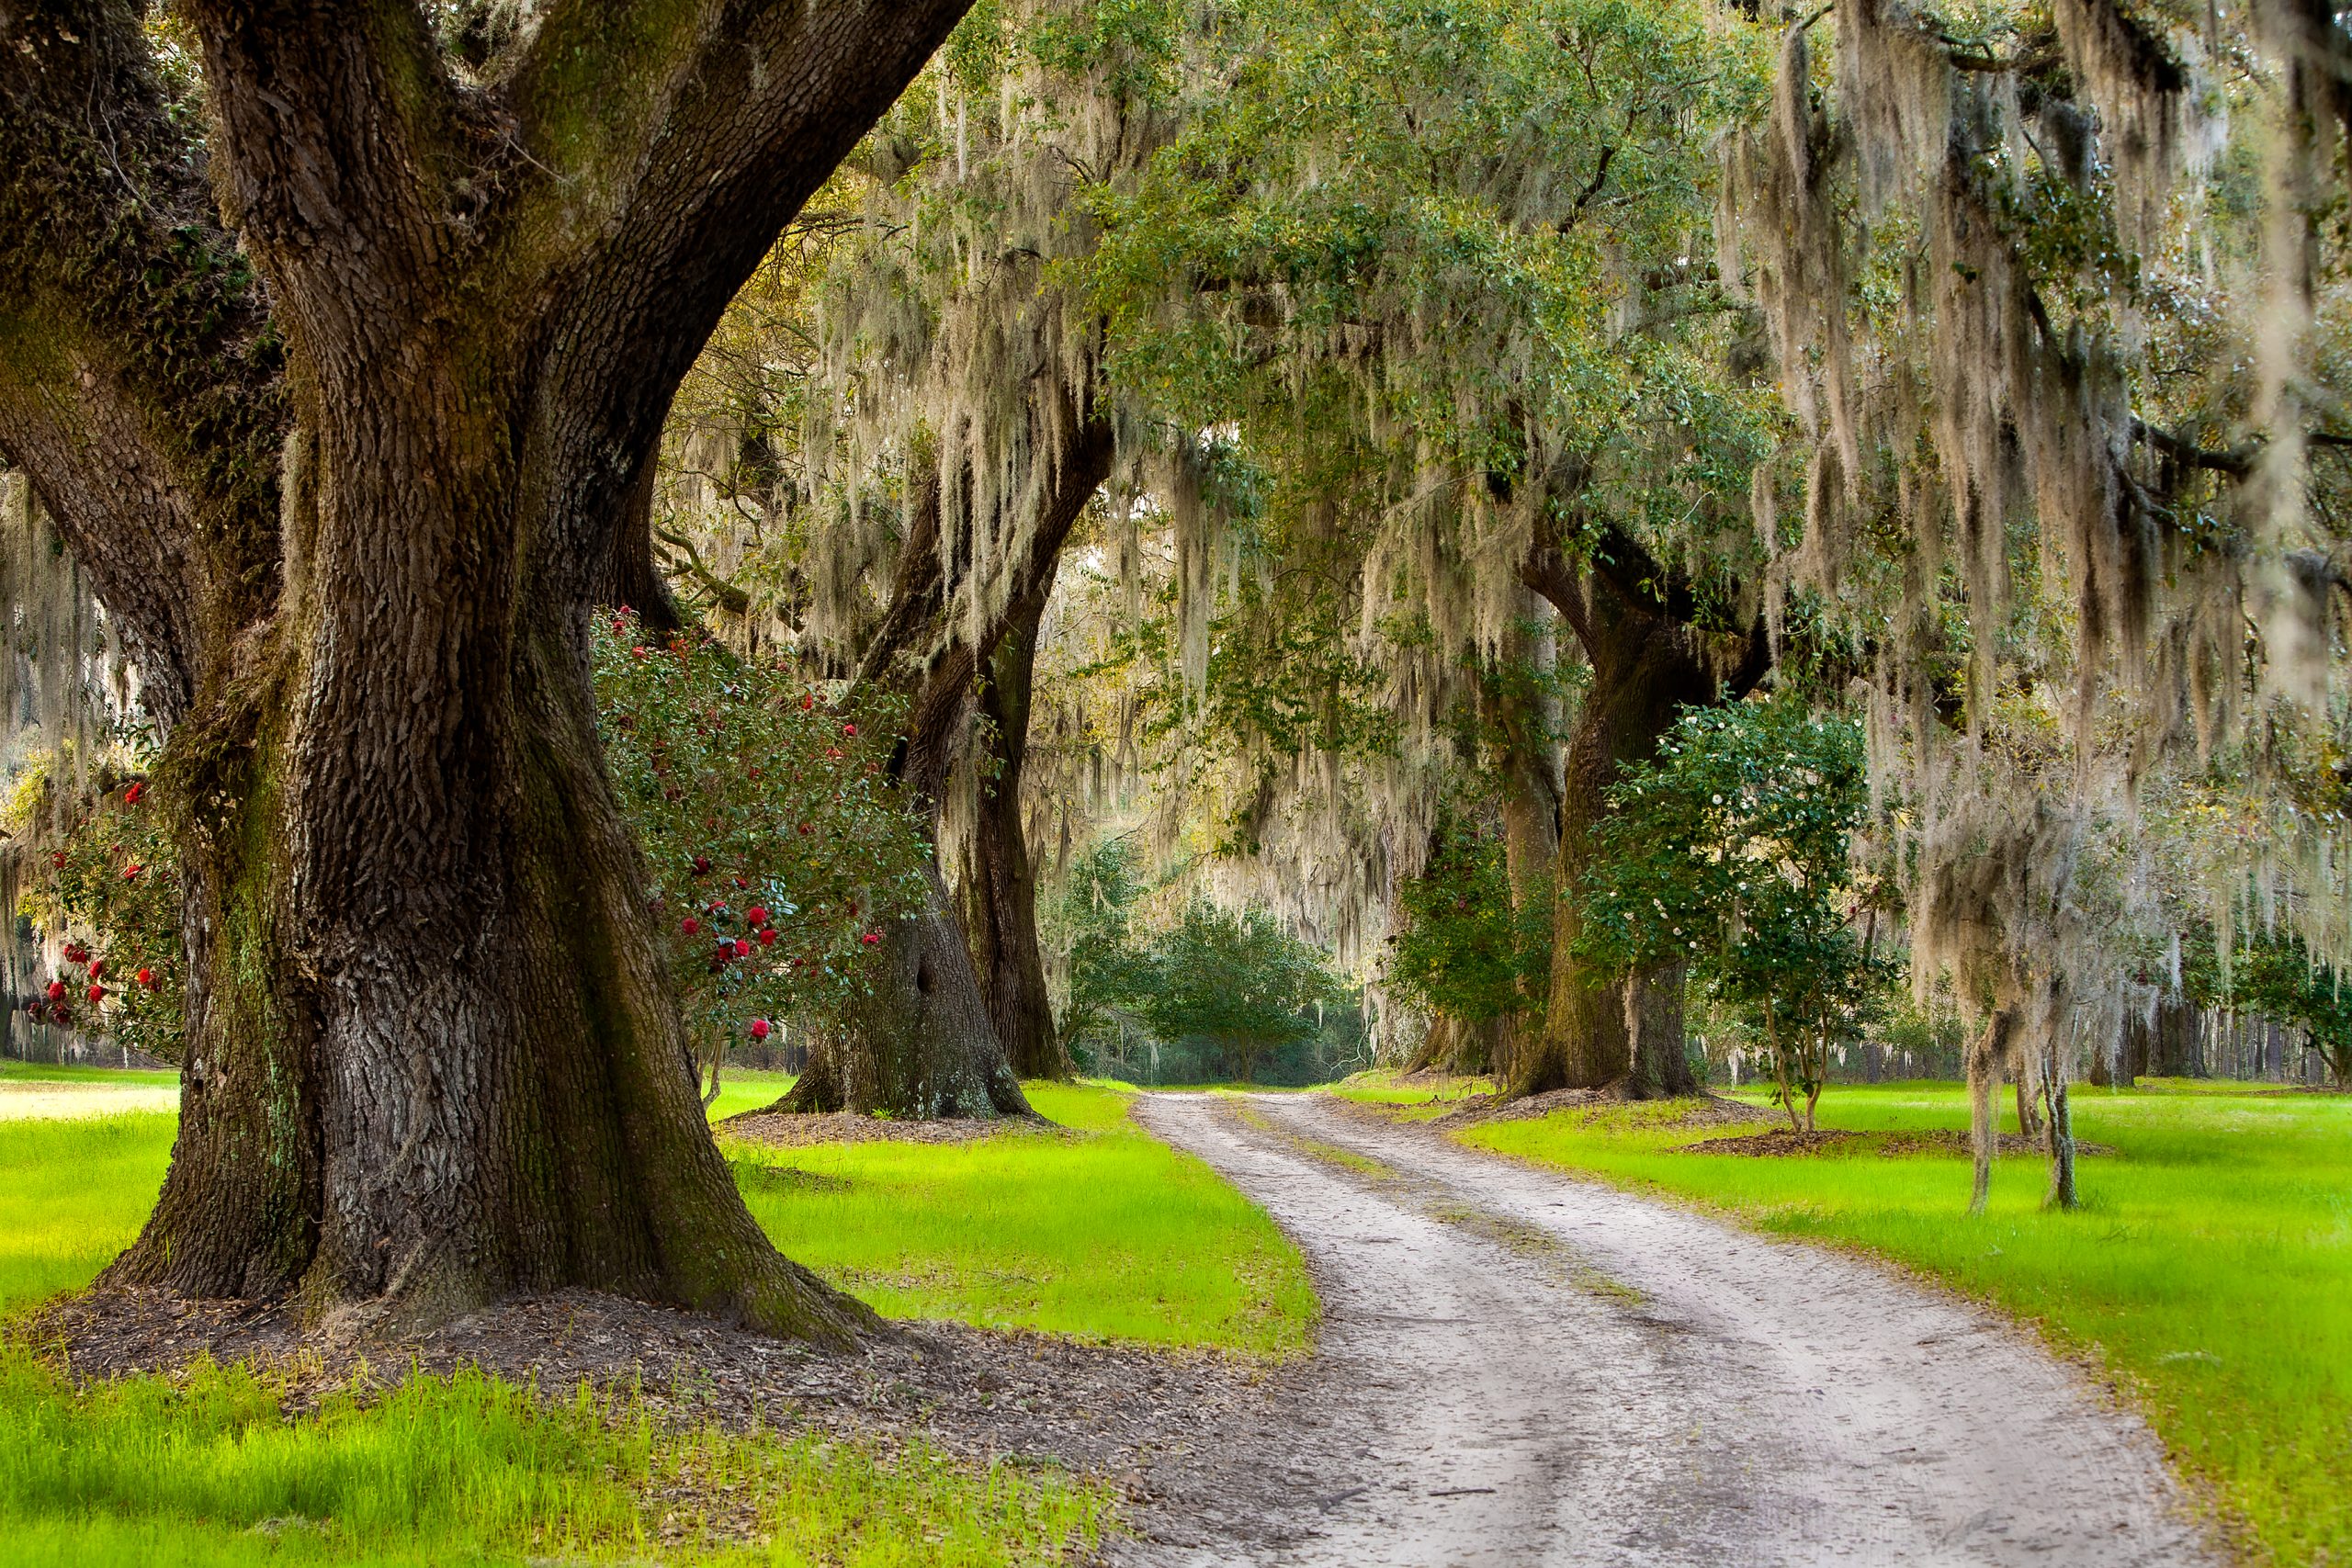 Quiet your mind and soul as you walk along a Lowcountry scene,  enjoying the natural beauty of Spanish moss, live oaks, and heirloom camellias. Nothing could be finer …